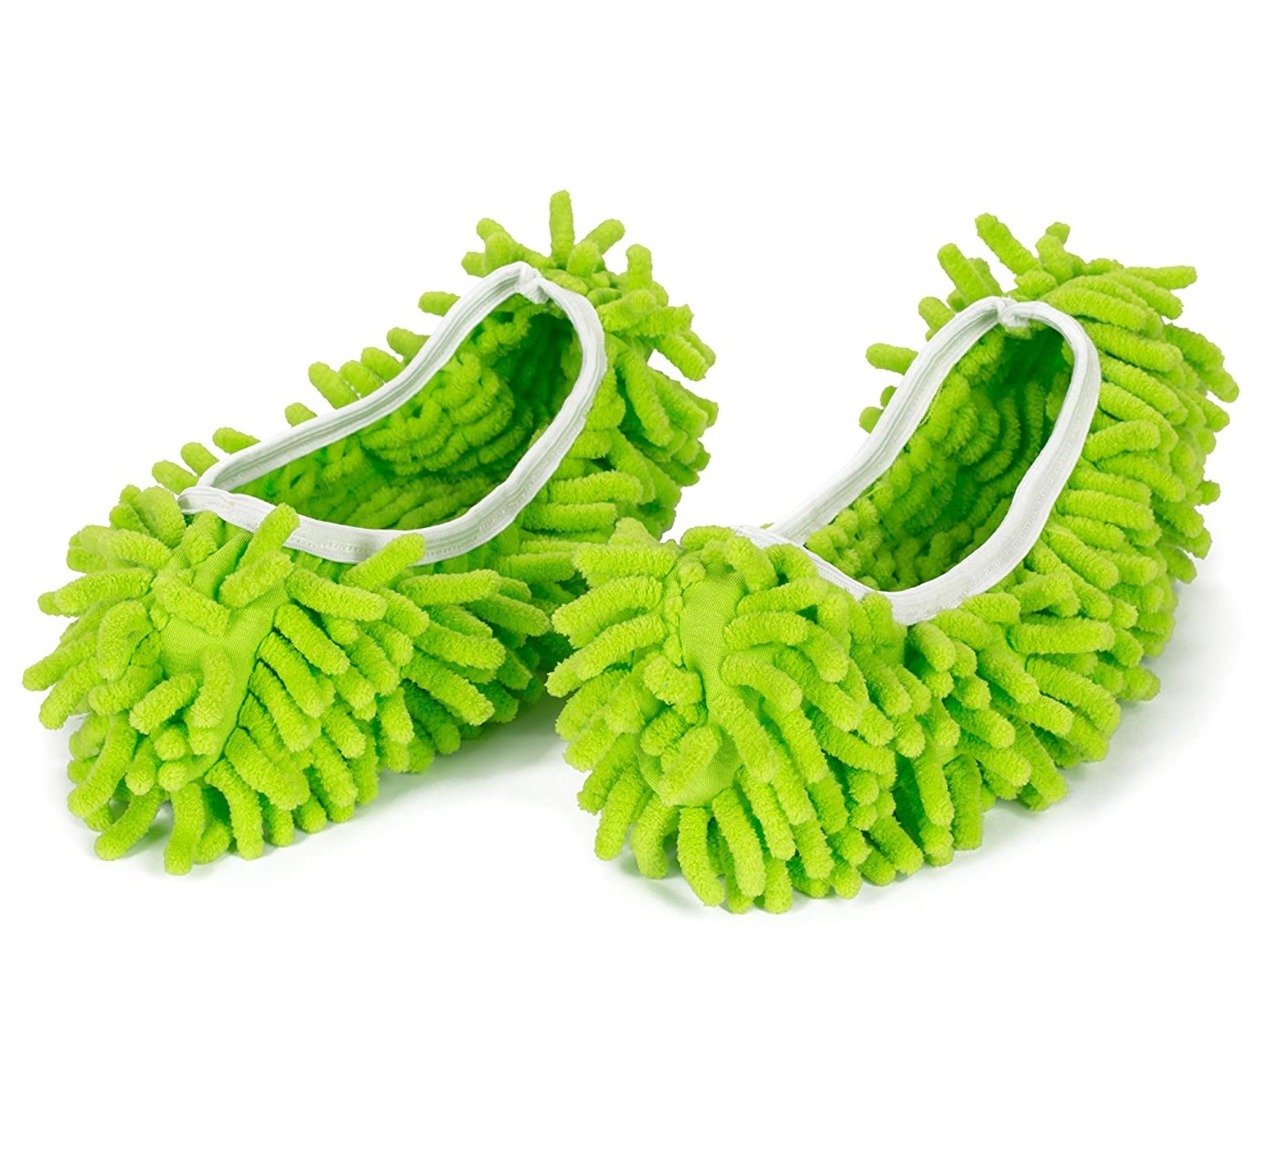 0516 Multi-Function Washable Dust Mop/Floor Cleaning Slippers - SkyShopy